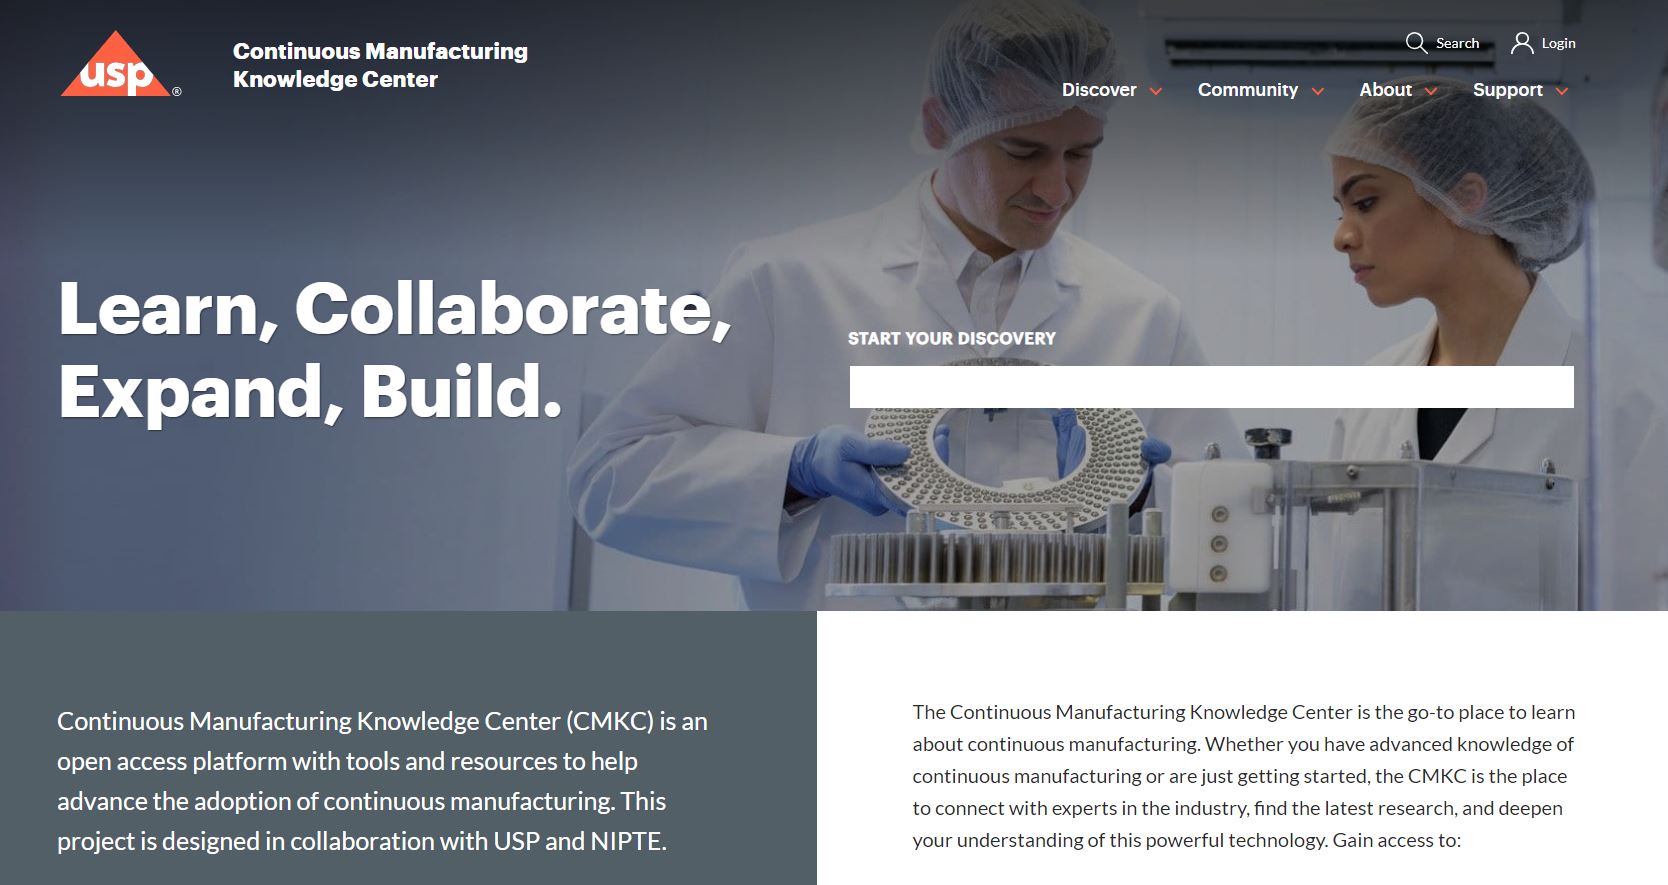 Pharmaceutical Continuous Manufacturing: Knowledge Center Debuts to Expand Information Access, Facilitate Innovation, and Address Barriers to PCM Adoption